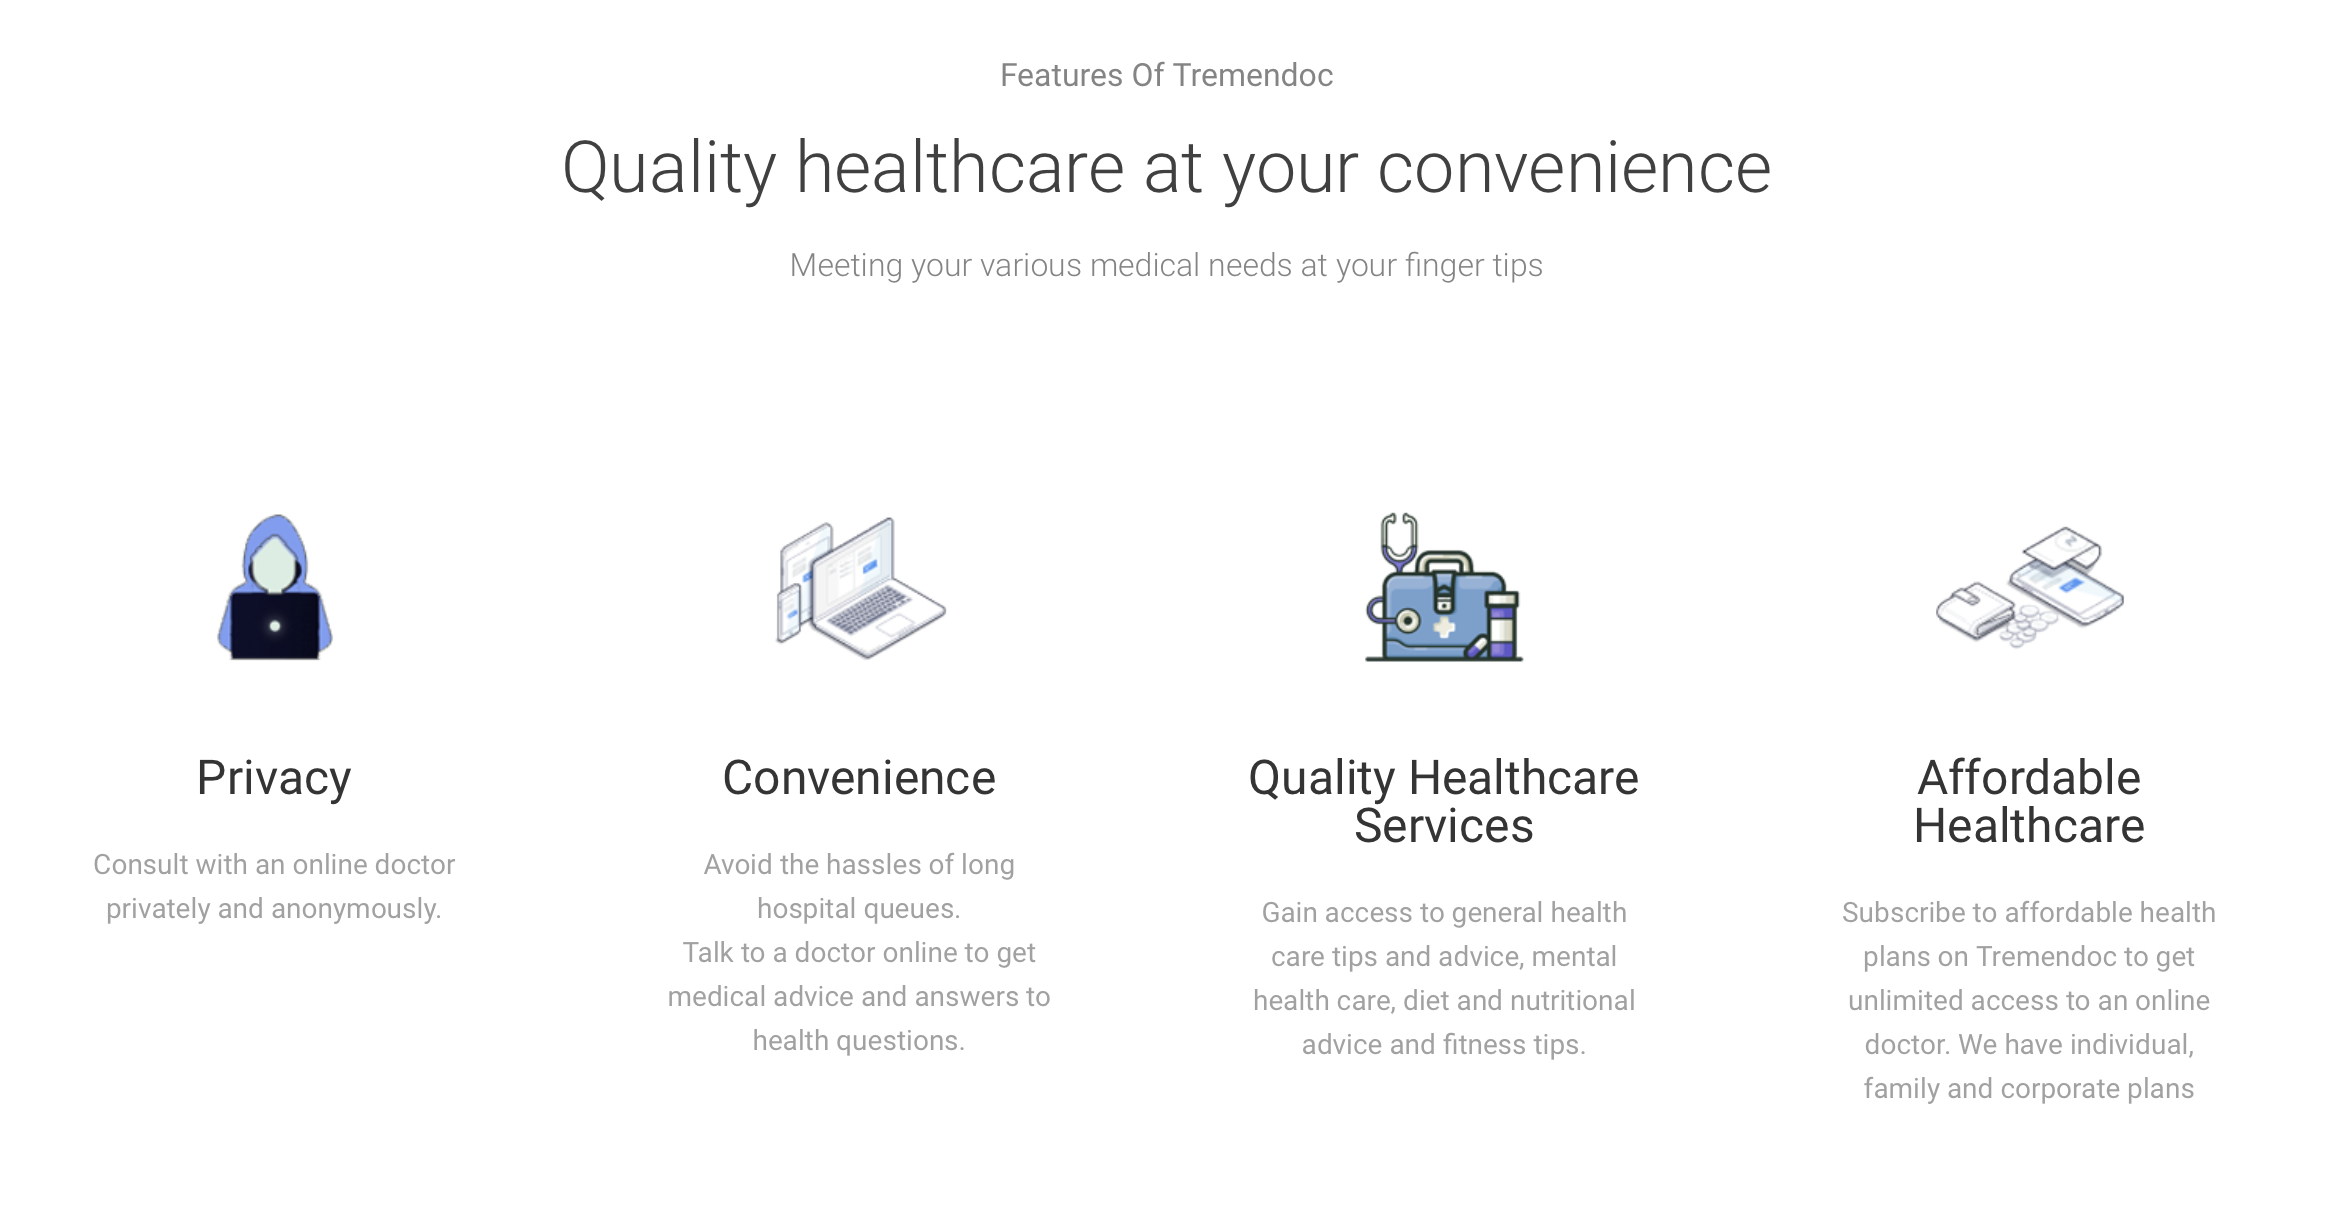 Tremendoc allows patients access medical doctors anywhere anytime for a small monthly fee.